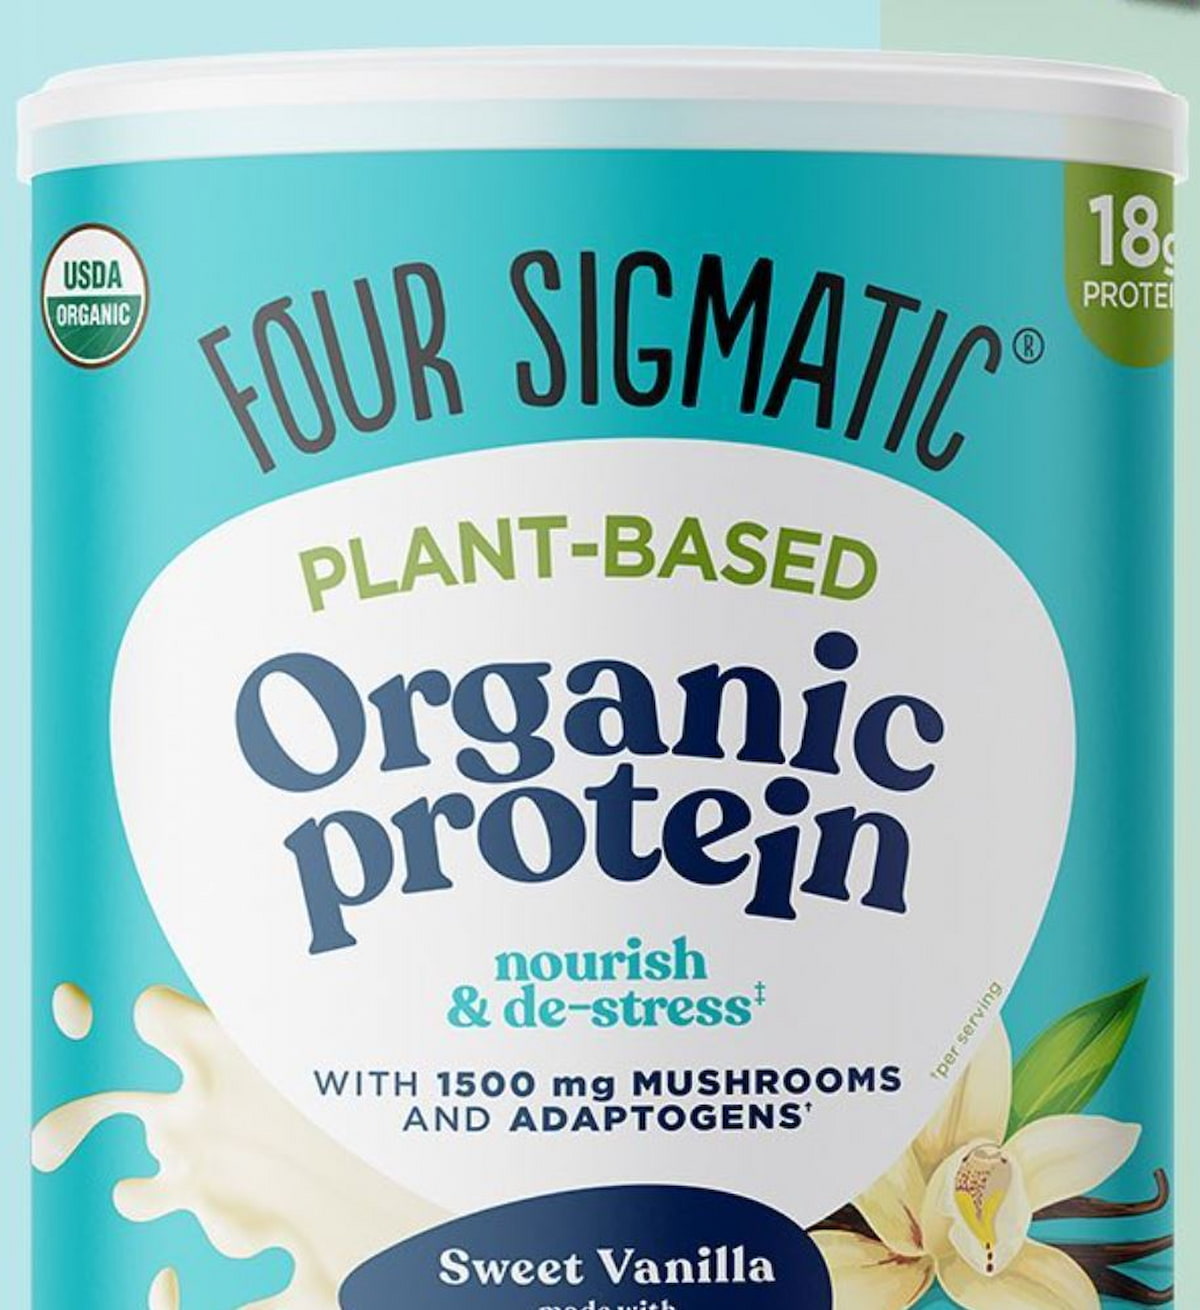 A container of Four Sigmatic brand organic vegan protein powder.